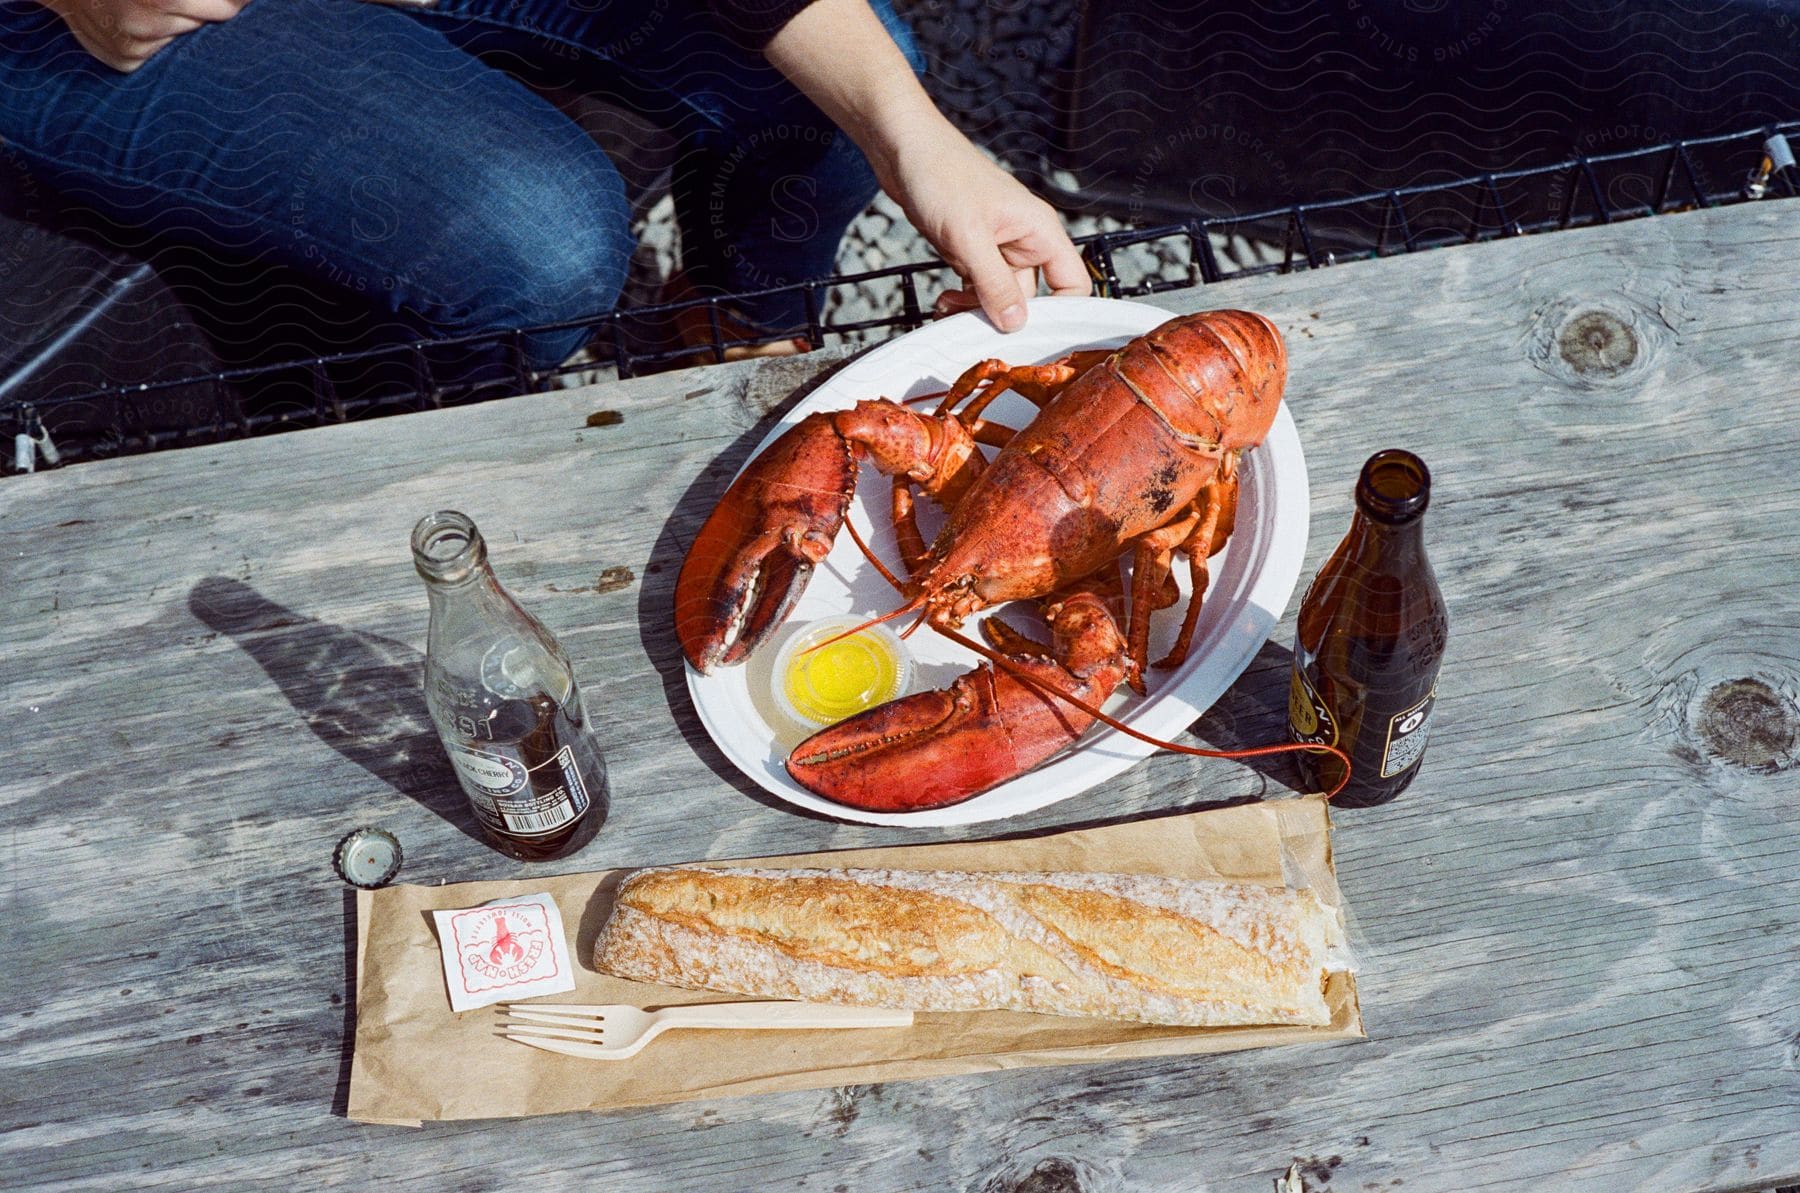 A wooden table displays an american lobster a beer bottle and a loaf of bread promising a satisfying meal